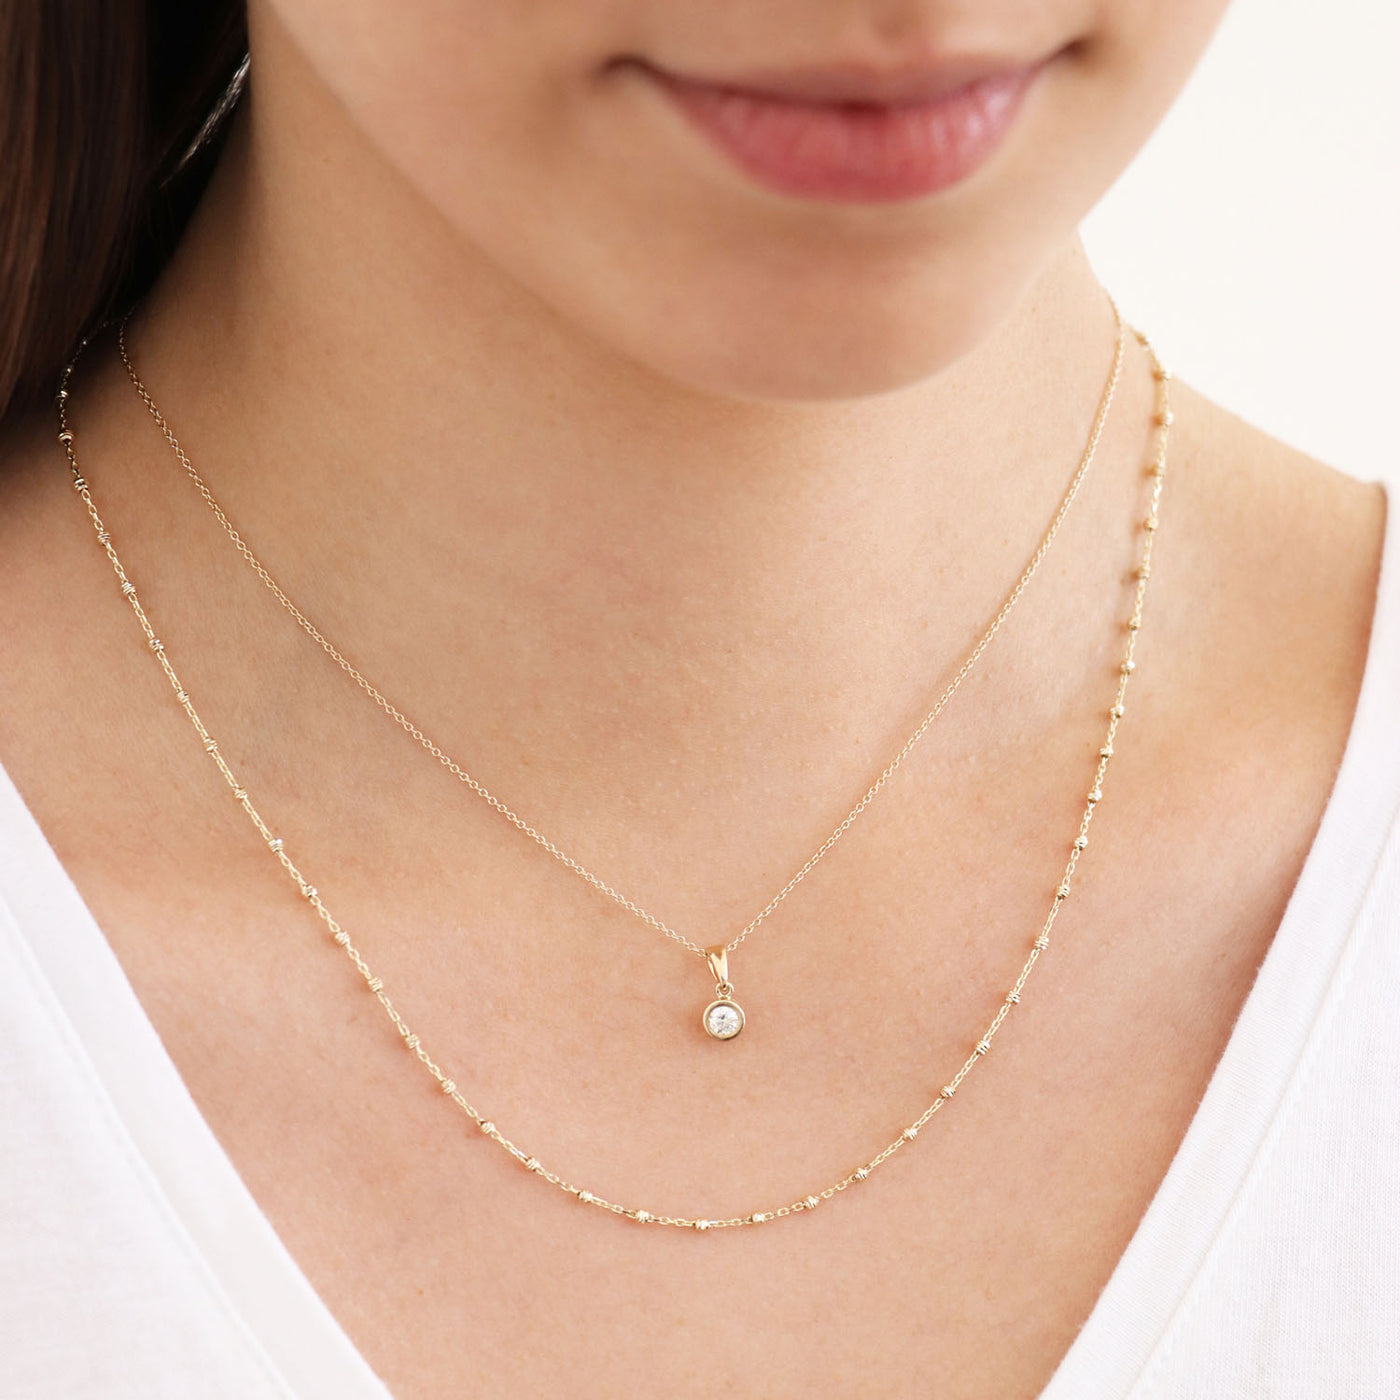 9ct yellow Gold Scattered Bead Necklace.